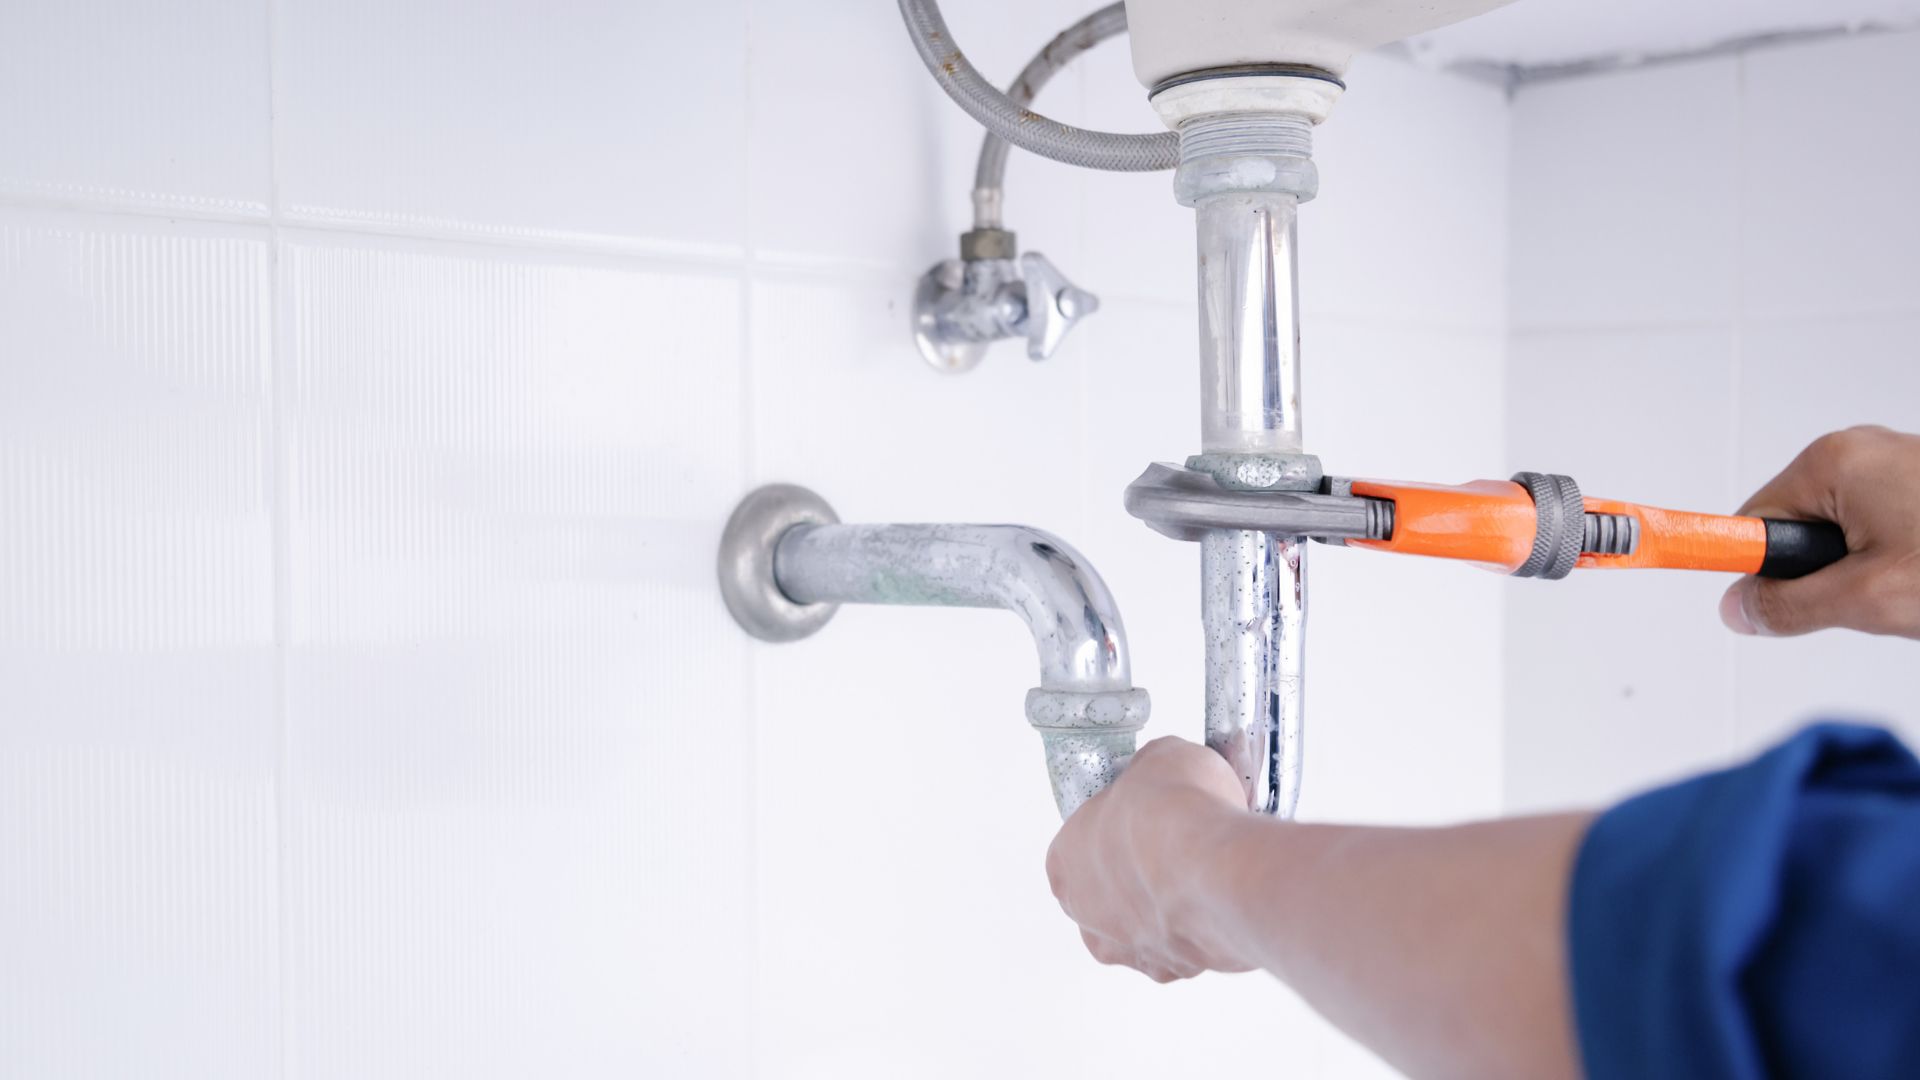 Get ready for cold weather with the help of our plumbers.